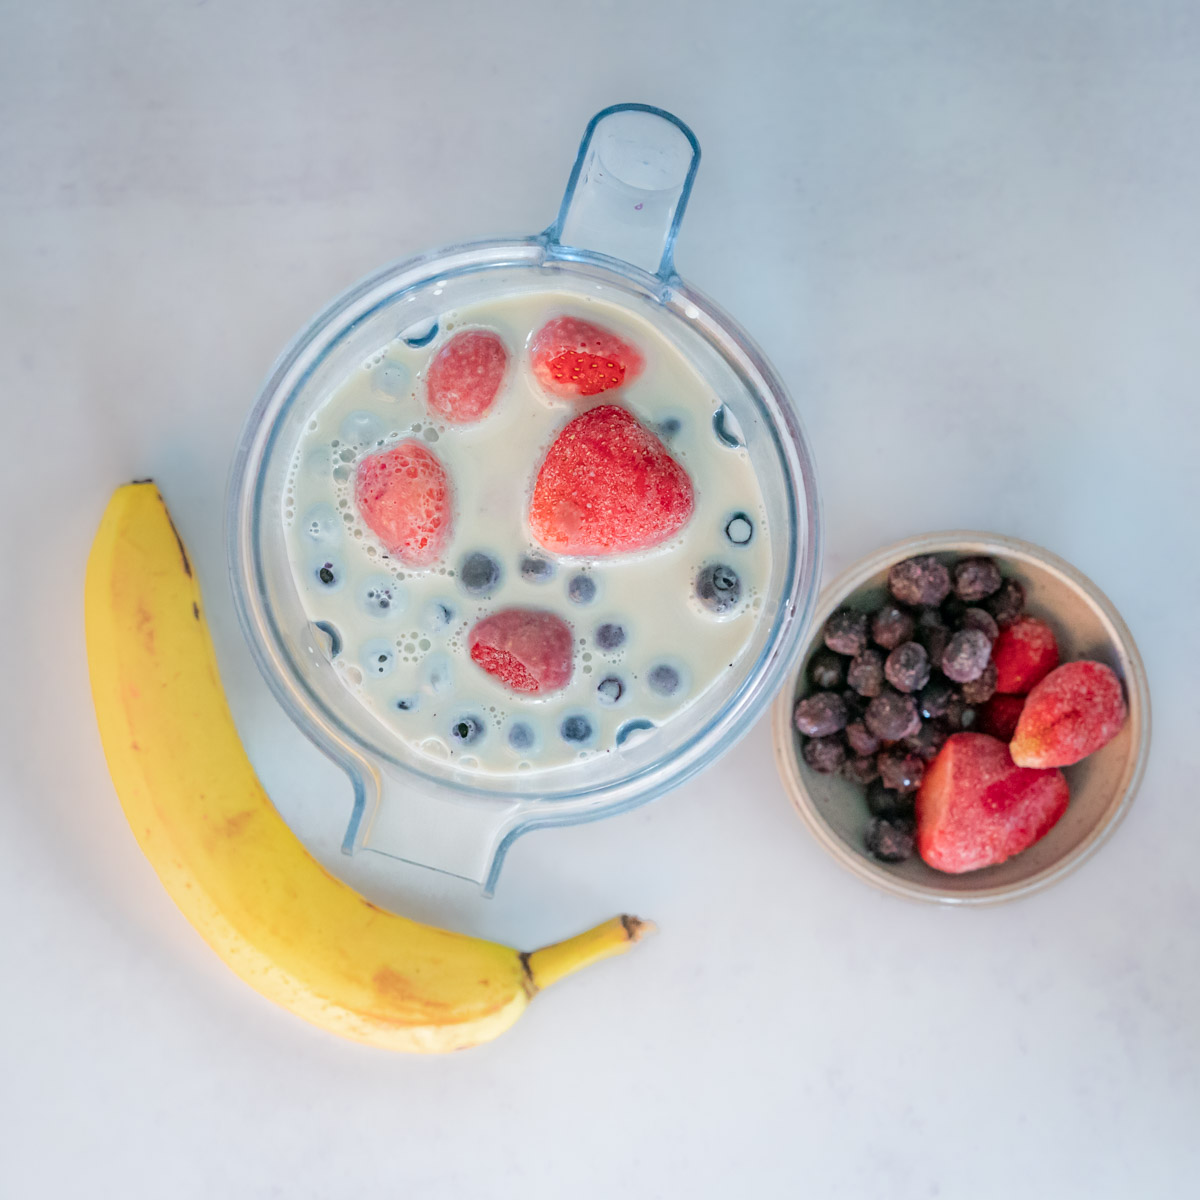 Top down of smoothie ingredients. In the photo include banana, a blender container with milk and berries visible, and a small bowl to the right of the blender full of berries.